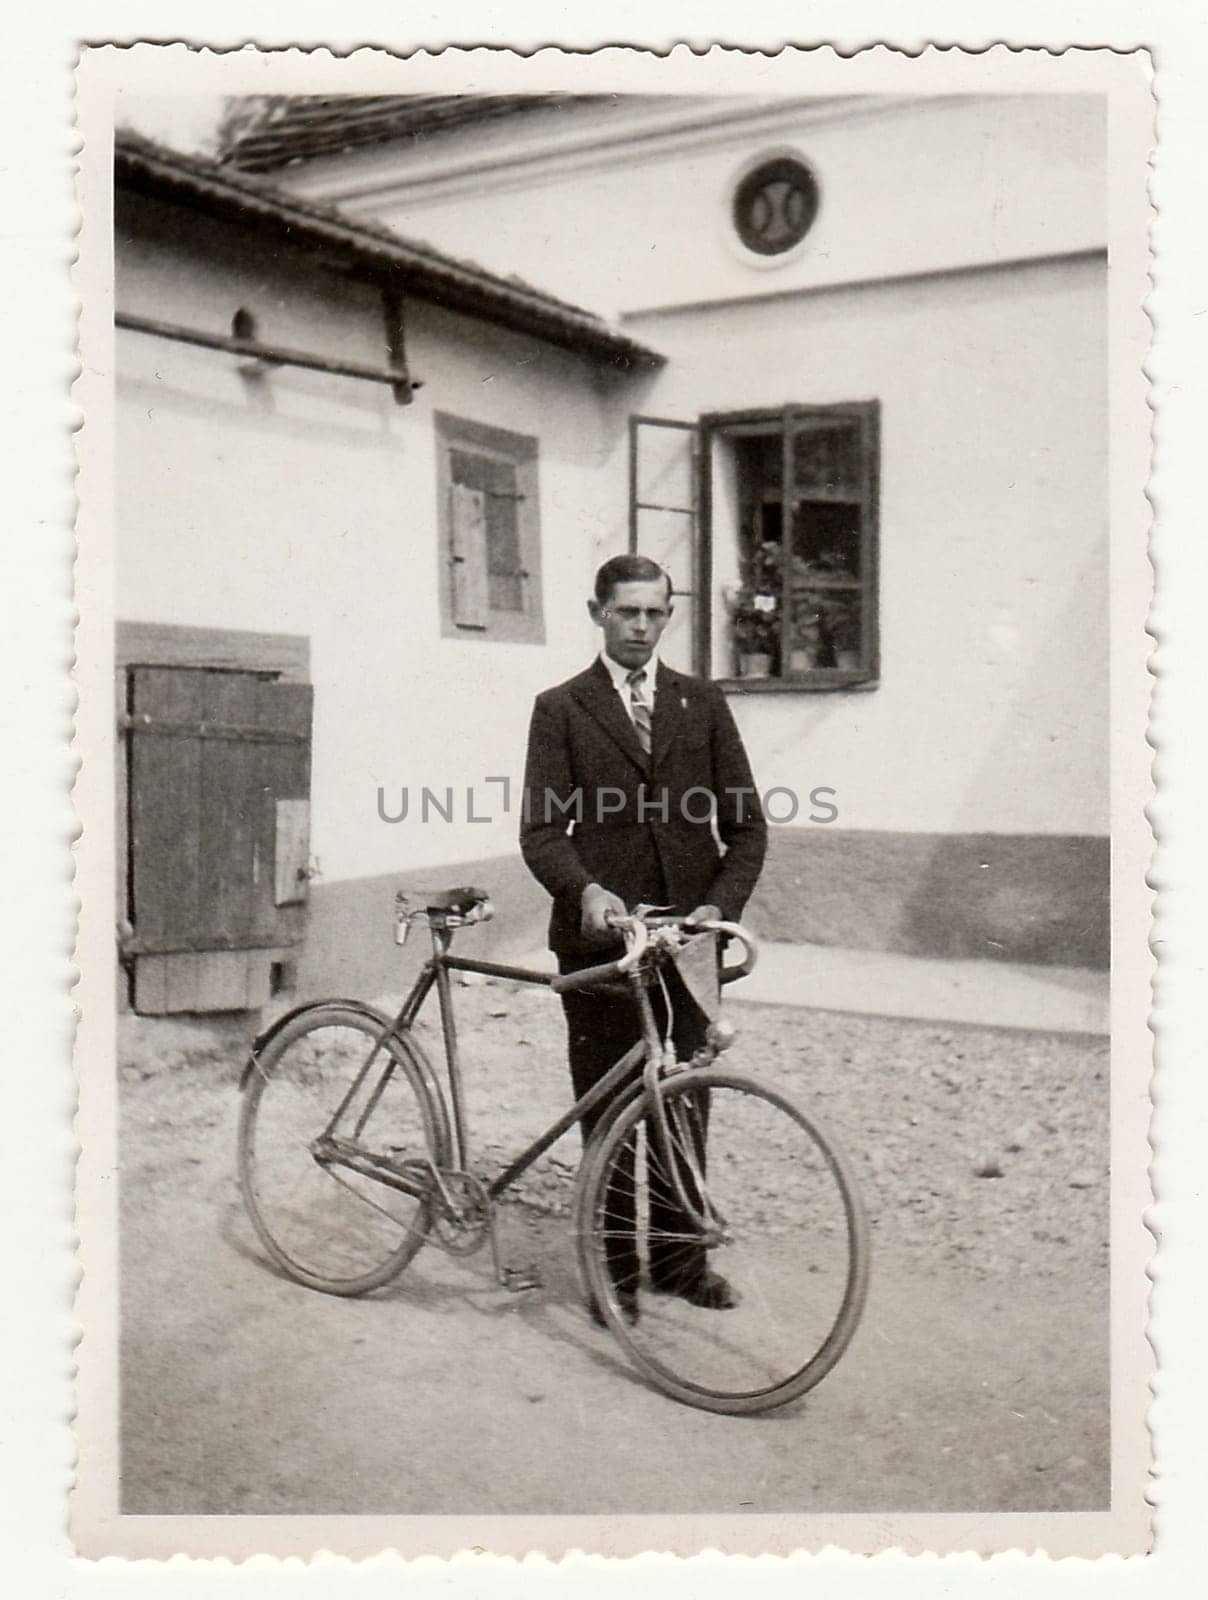 THE CZECHOSLOVAK REPUBLIC - CIRCA 1940s: Vintage photo of a young man with bicyckle on the back yard.